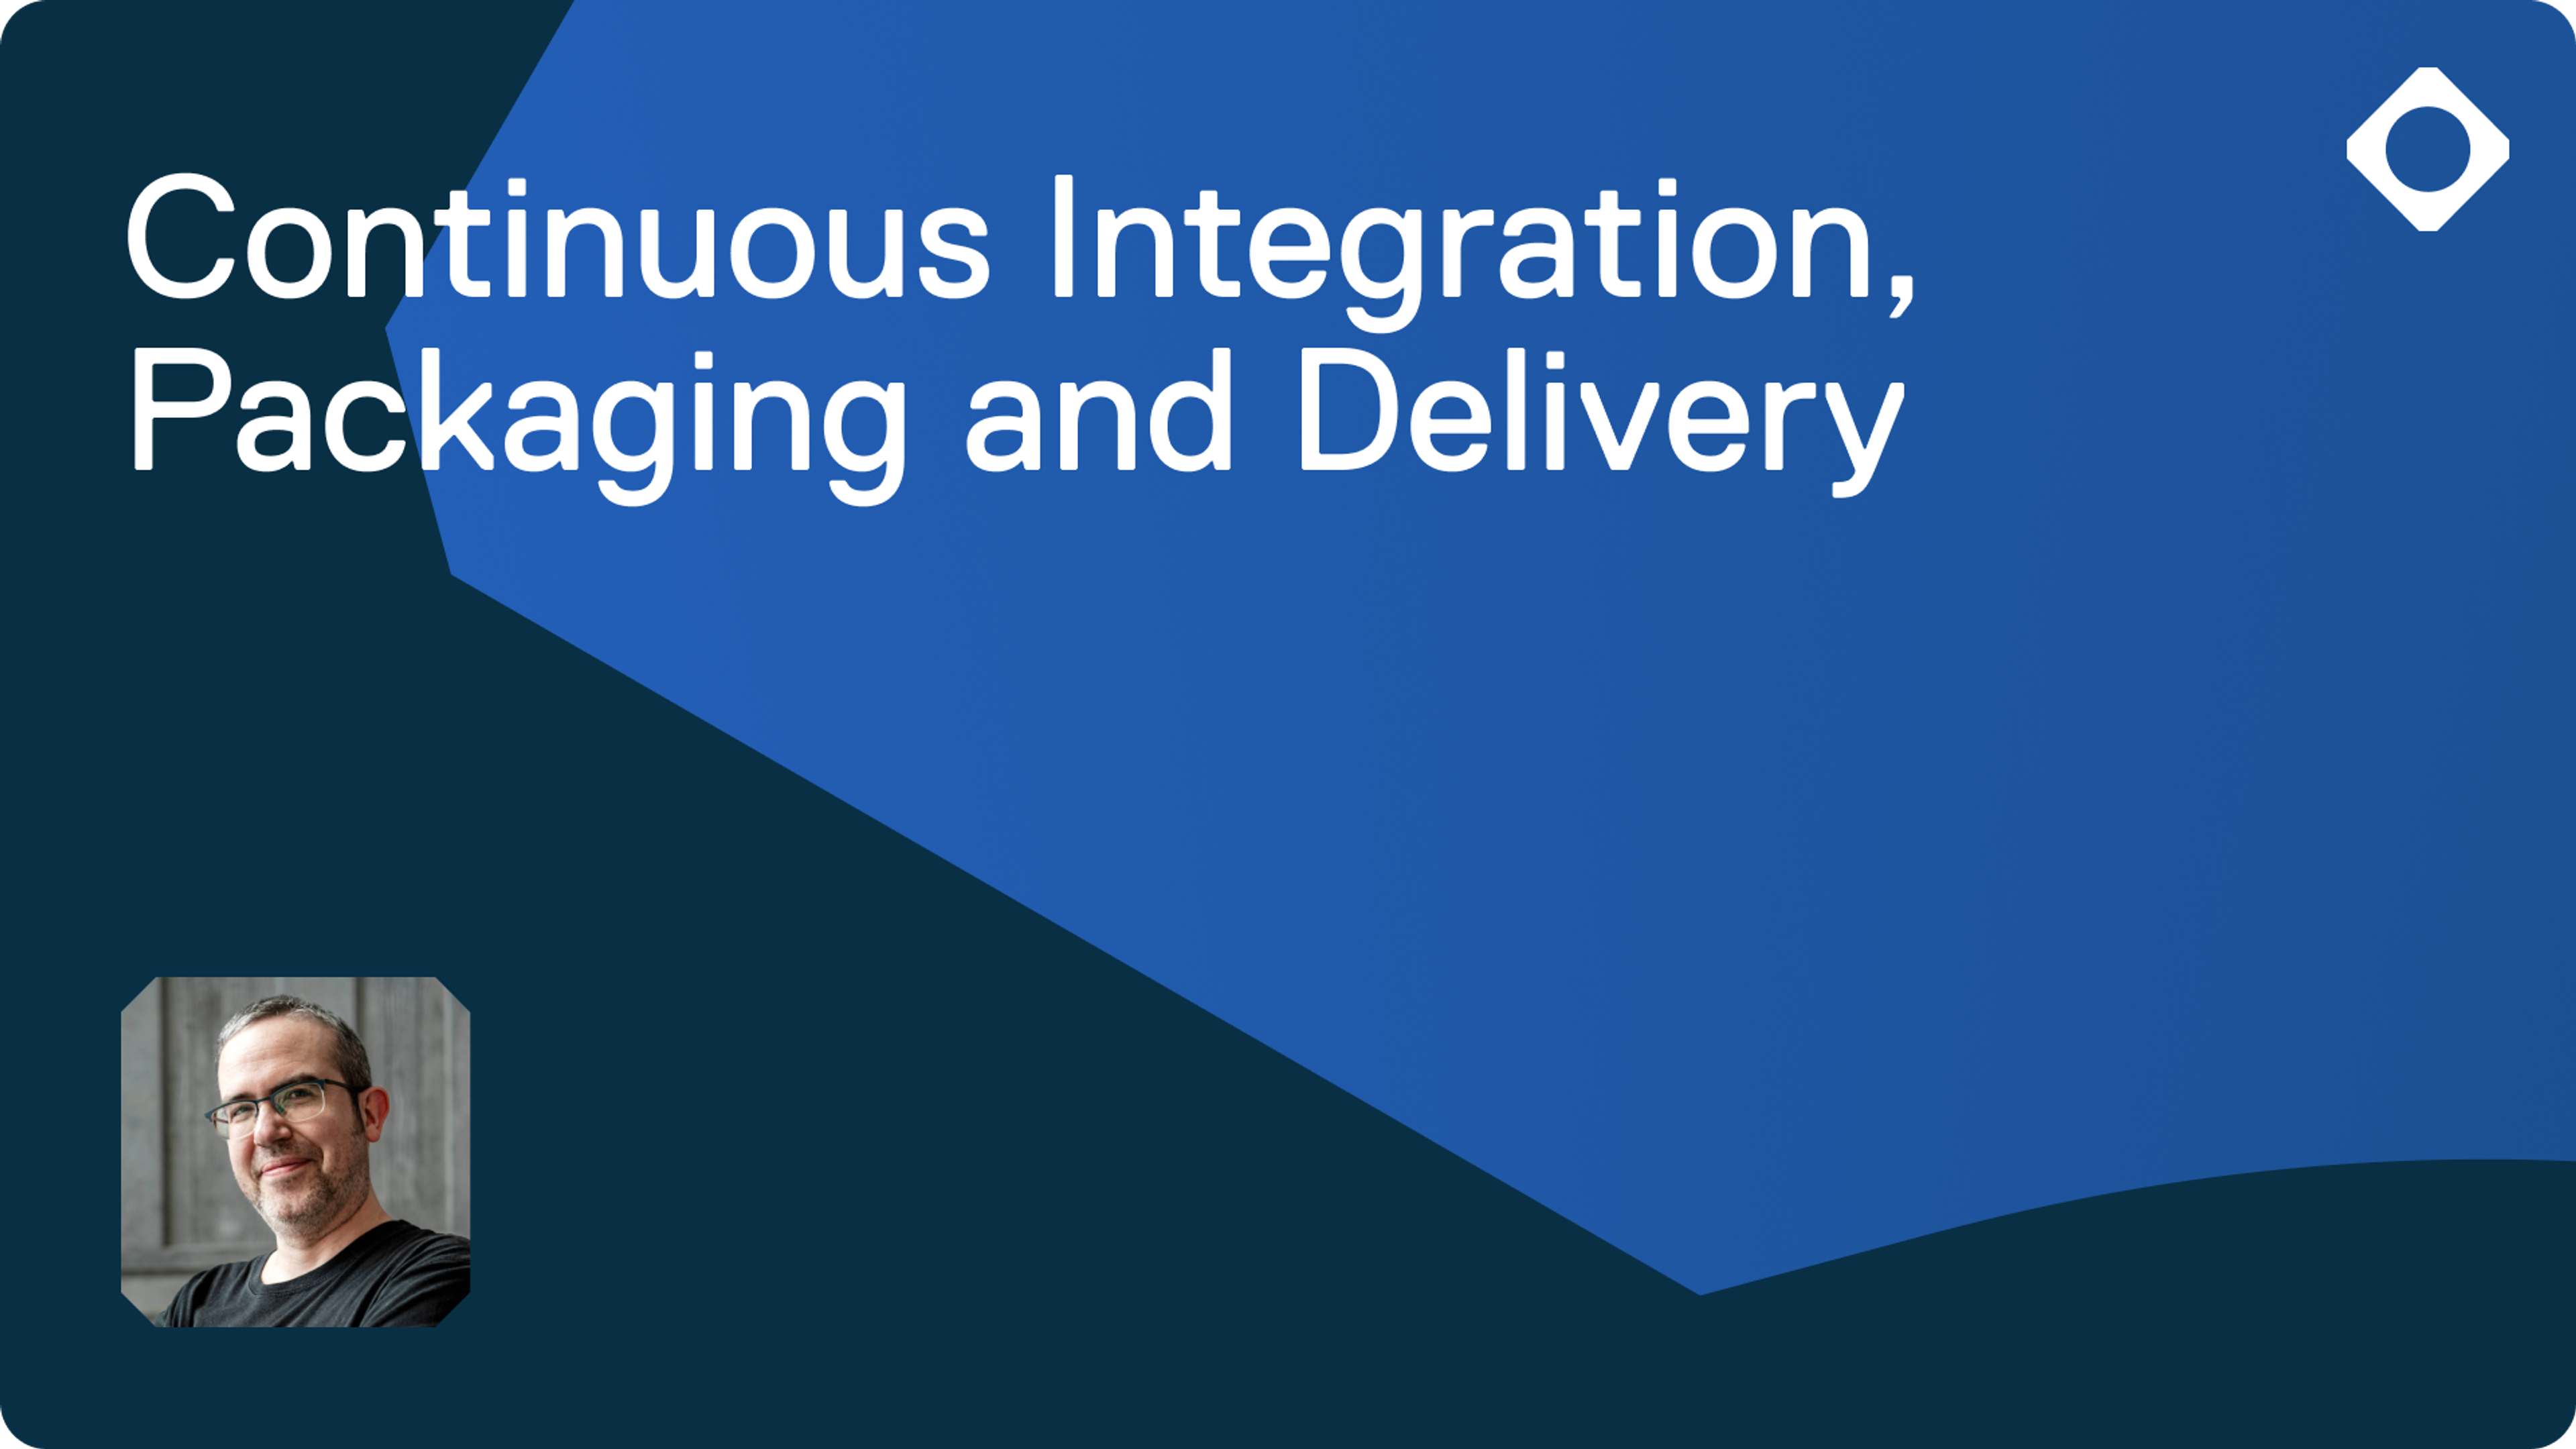 The Future is Continuous Integration, Packaging and Delivery